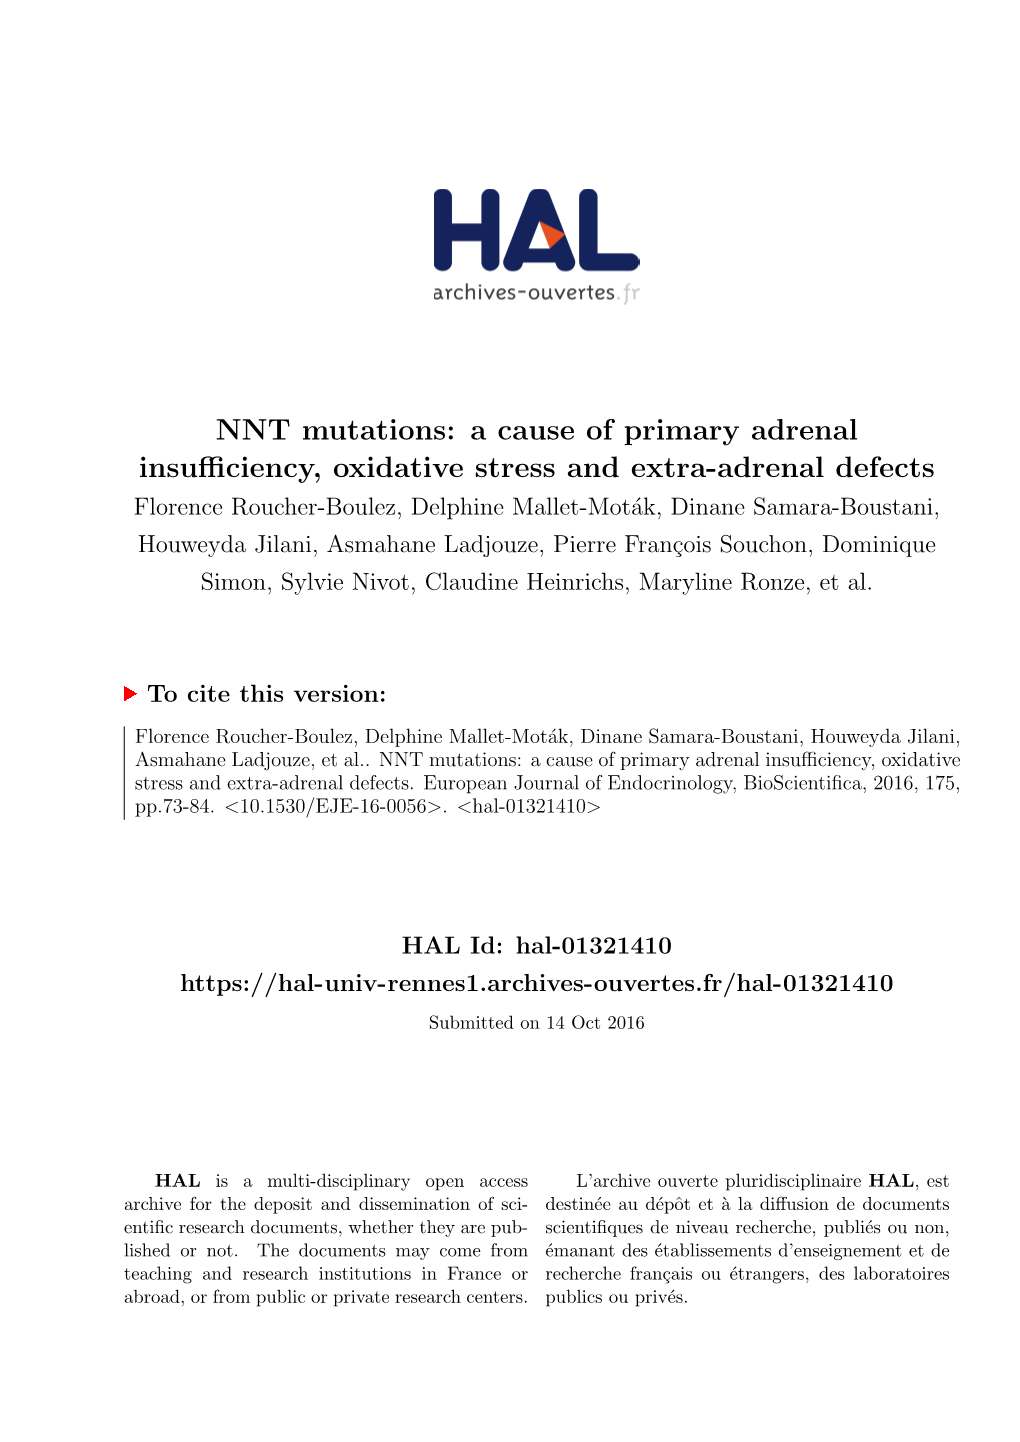 NNT Mutations: a Cause of Primary Adrenal Insufficiency, Oxidative Stress and Extra-Adrenal